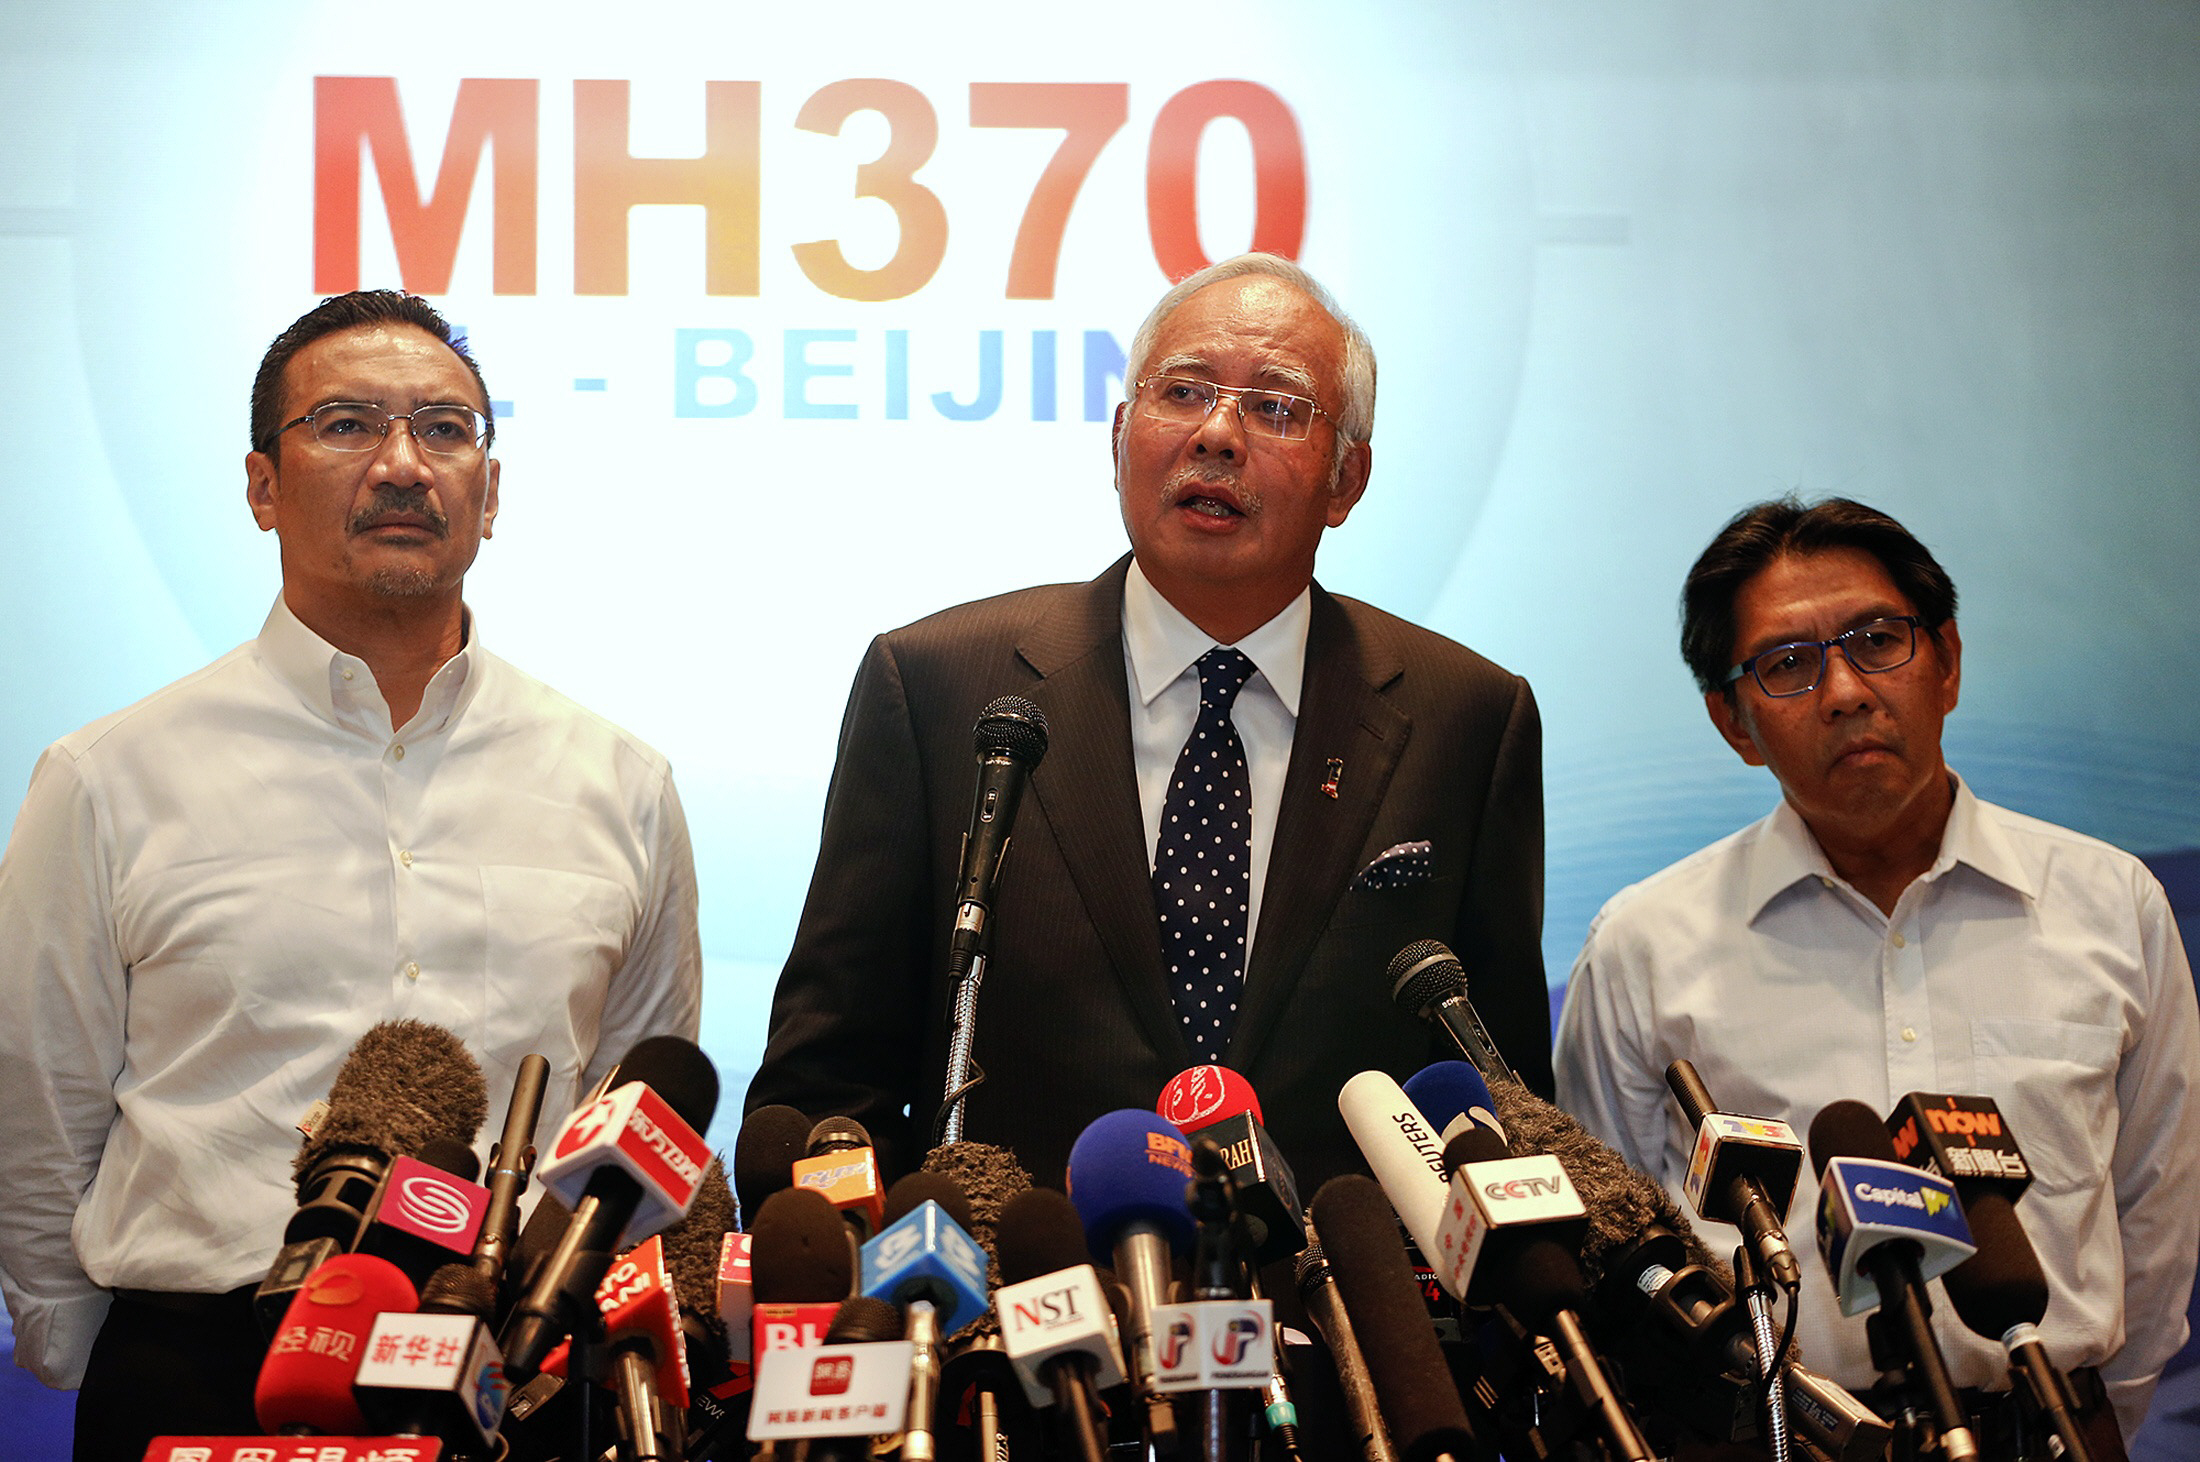 malaysian prime minister najib razak c addresses reporters about the missing malaysia airlines flight mh370 as transport minister hishammuddin hussein l and department of civil aviation 039 s director general azharuddin abdul rahman r stand by him at the kuala lumpur international airport photo reuters